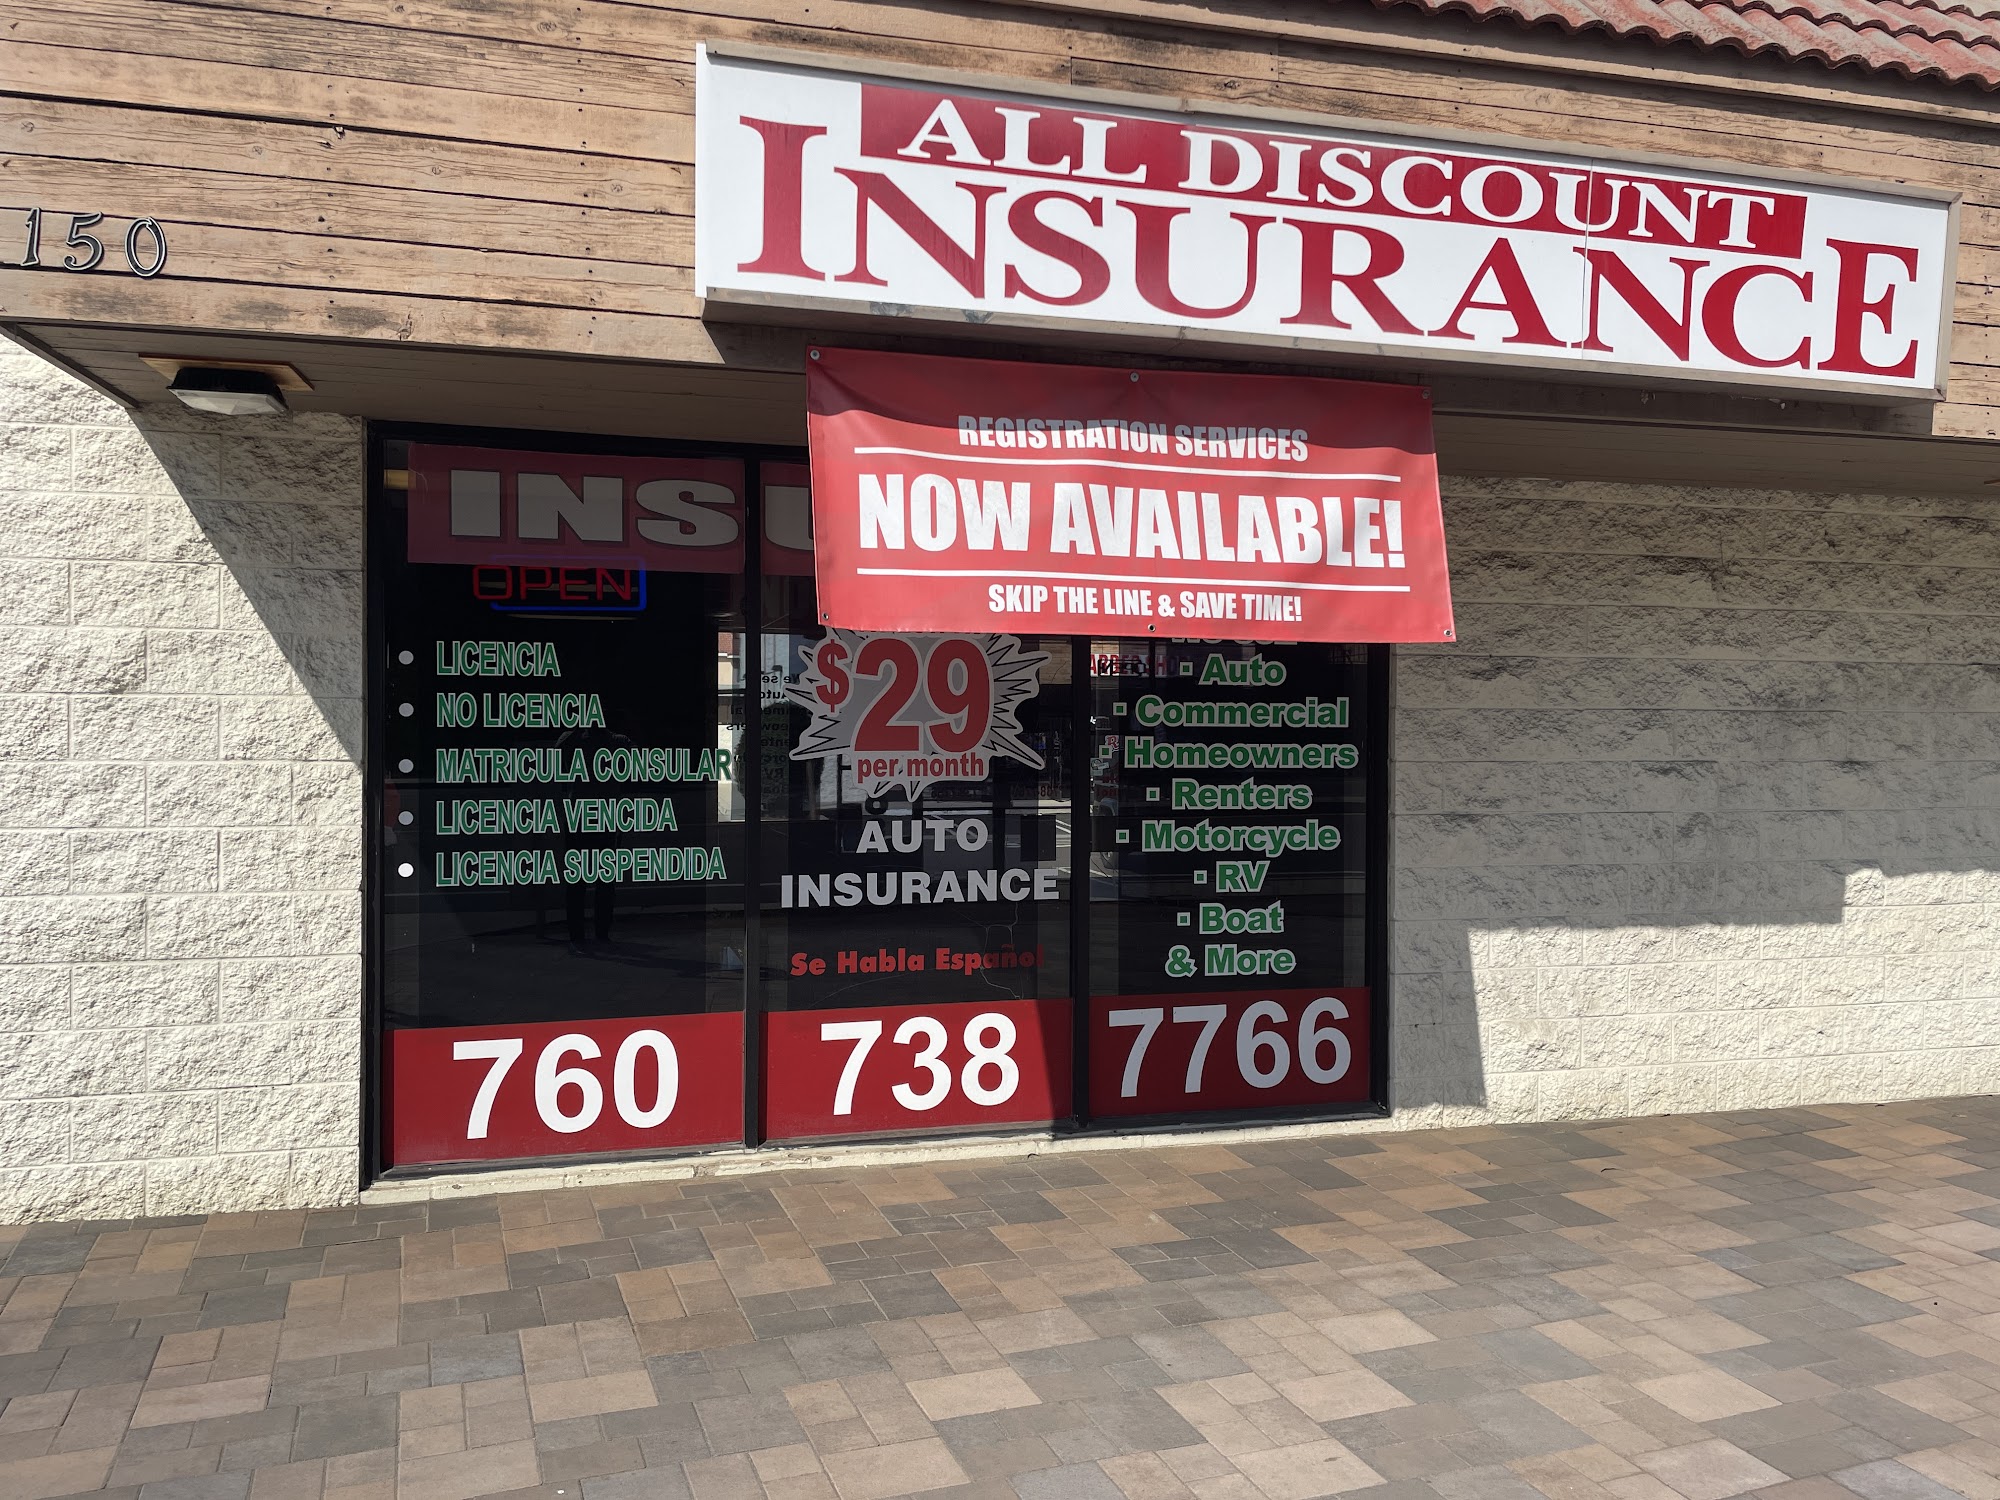 All Discount Insurance Services, Inc.